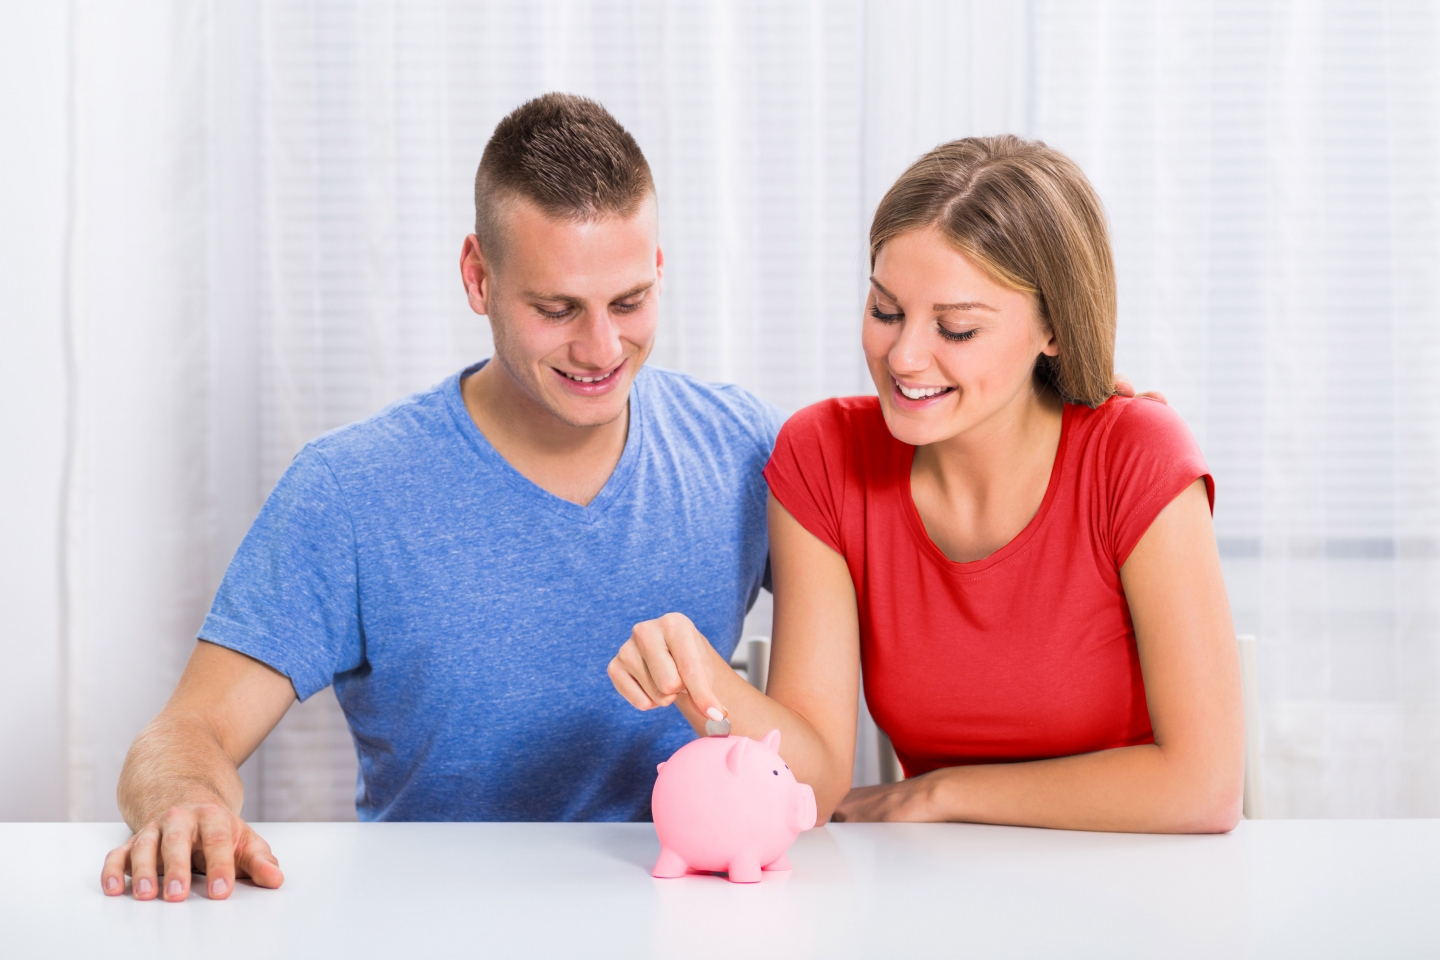 Couple sitting at a white table with a white background putting a coin into a pink piggy bank